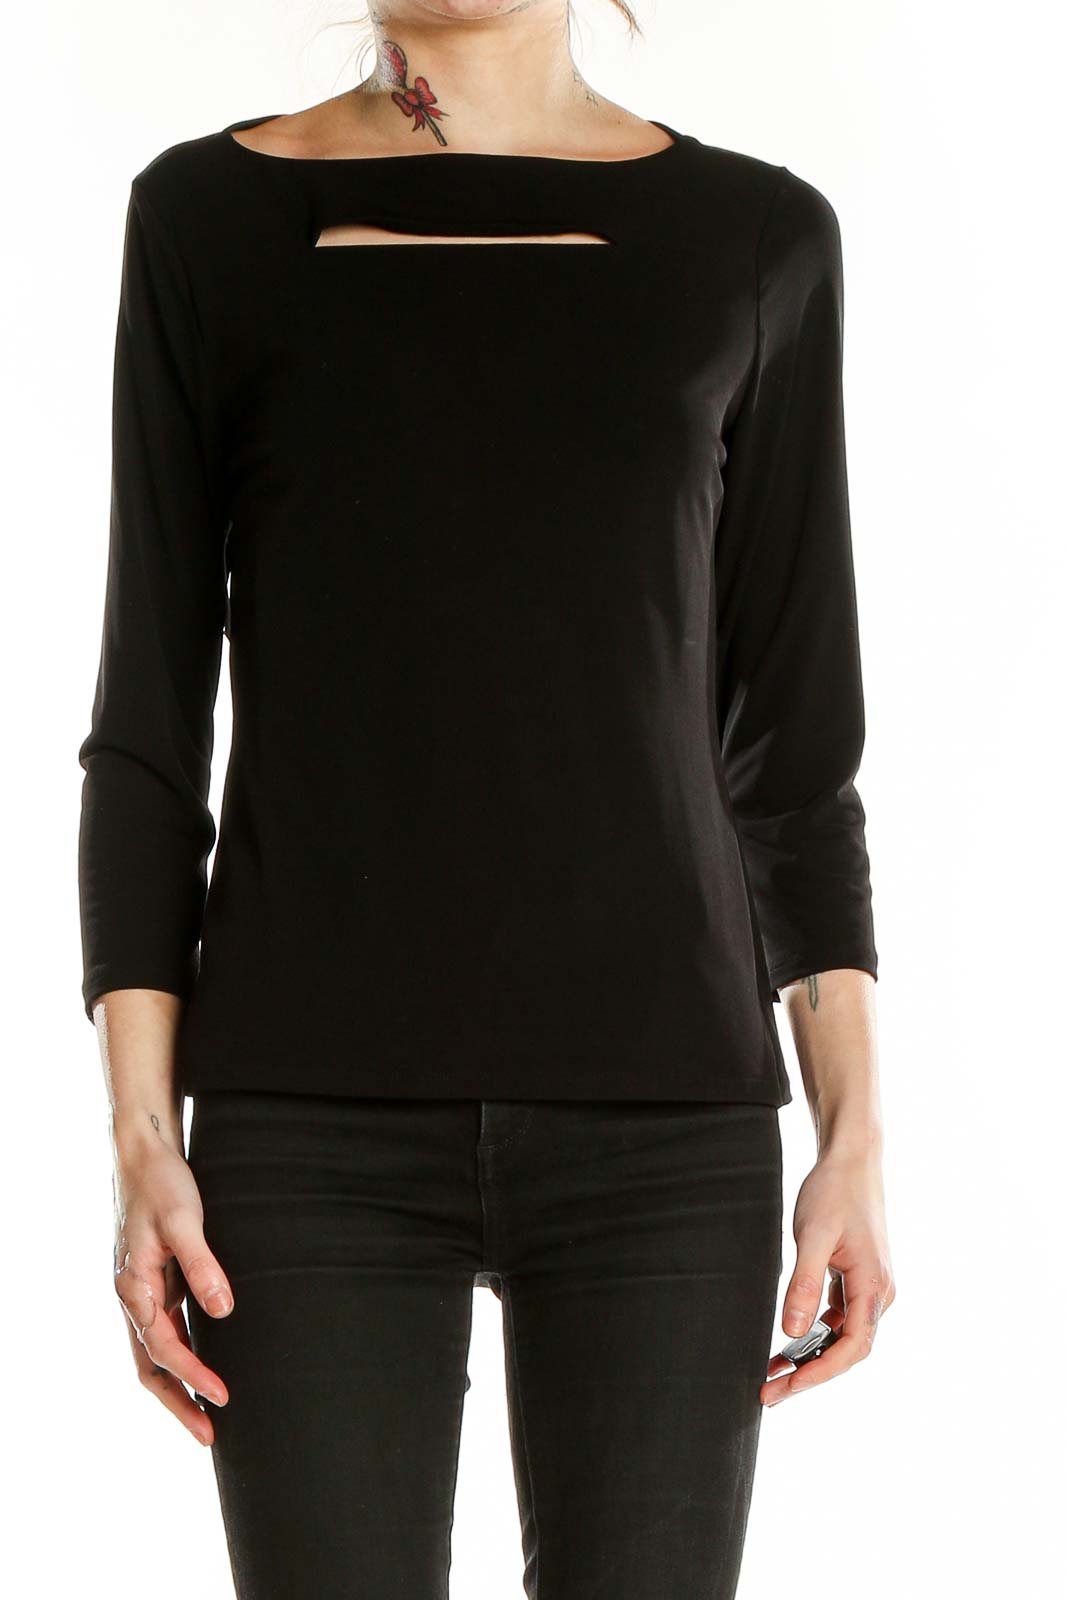 Black Boatneck Cut Out Top Front